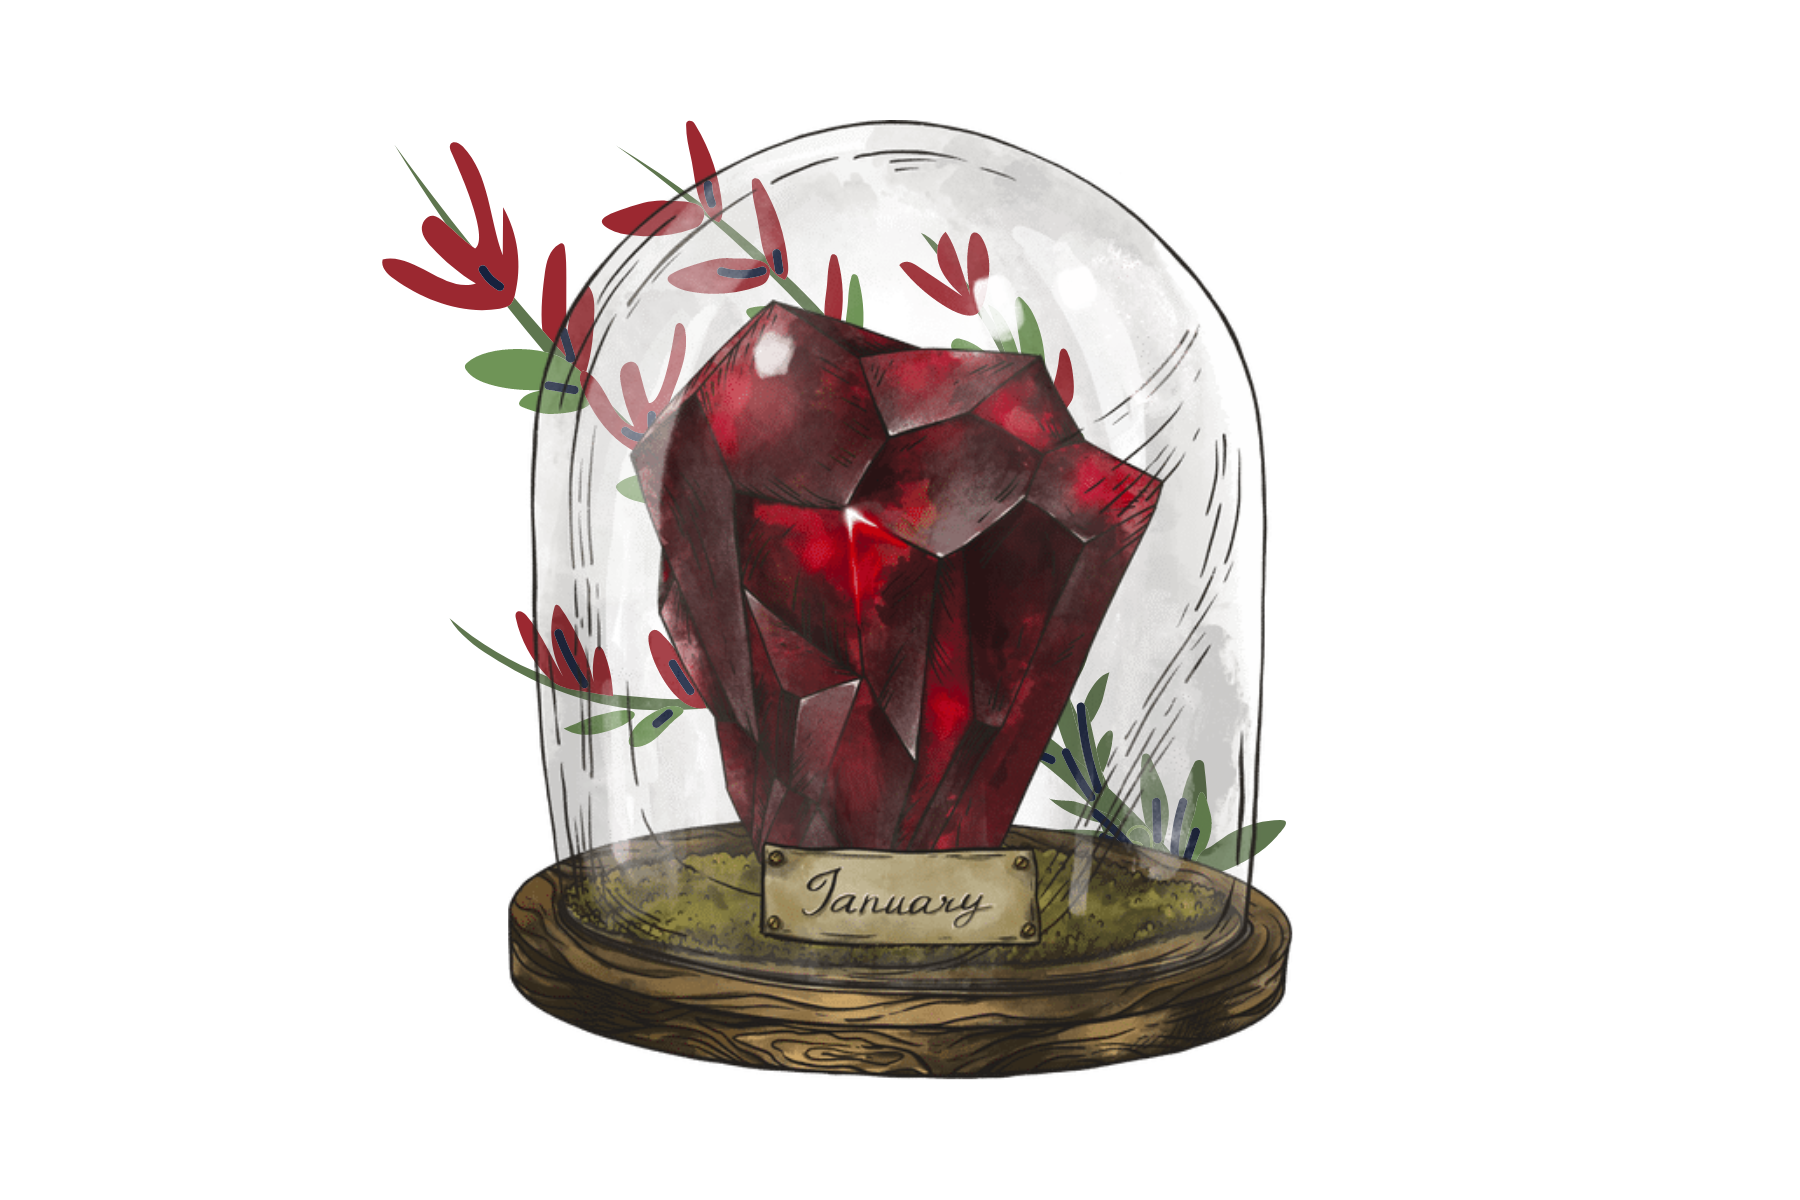 Garnet in a glass jar with leaves on the outside